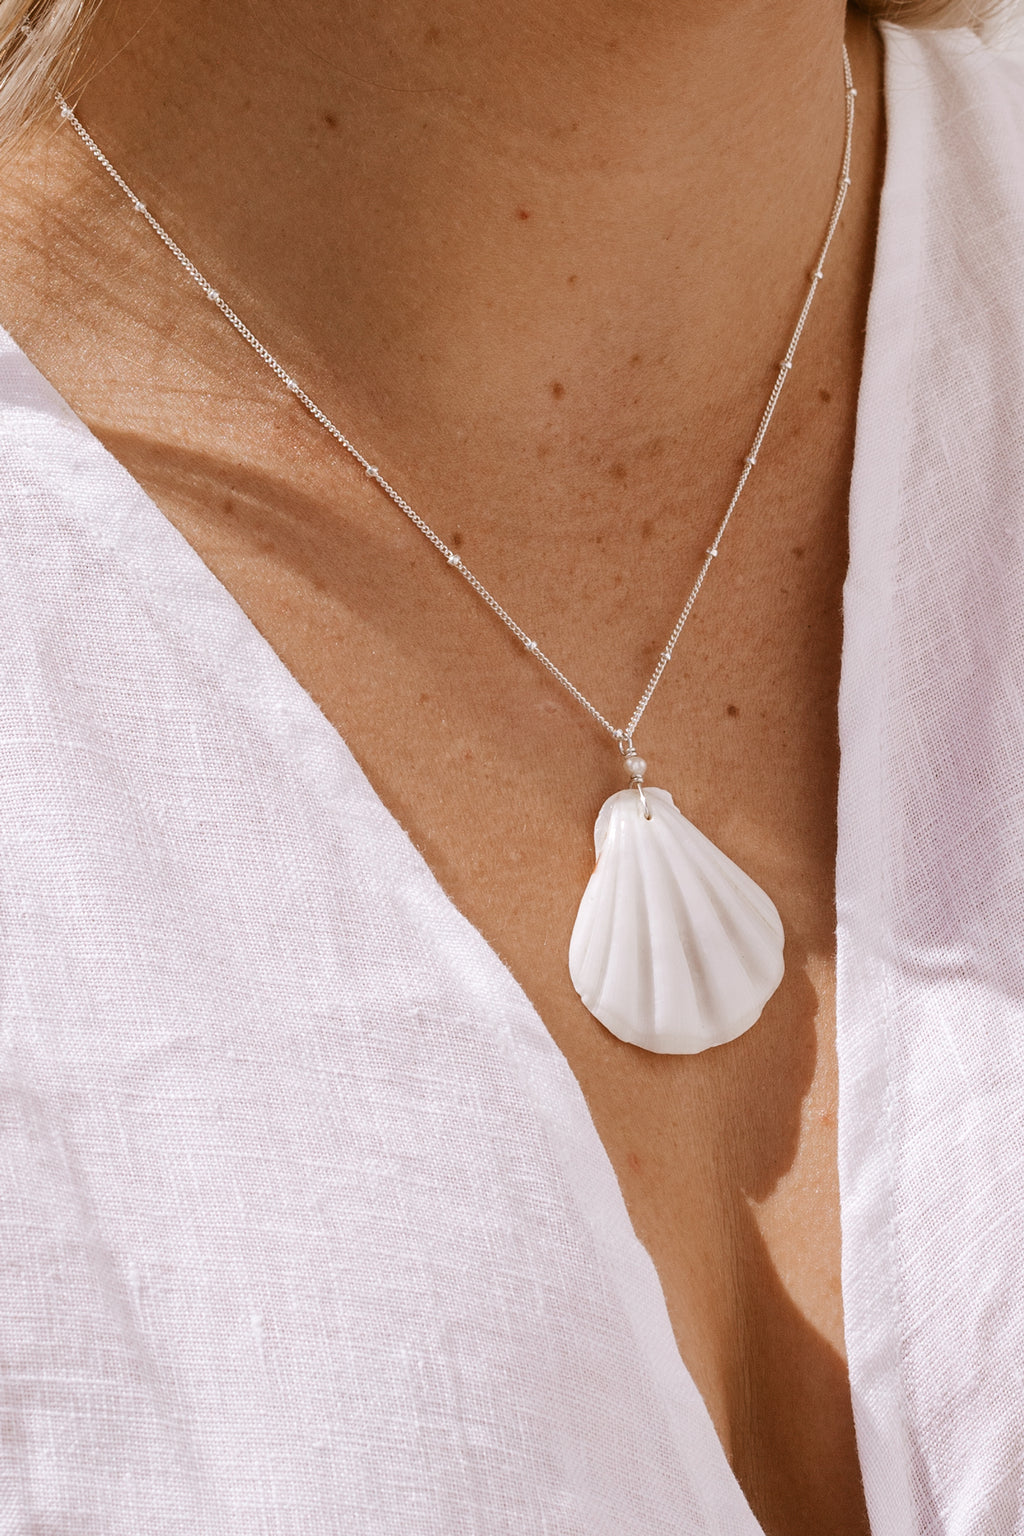 White Shell Satellite Necklace  - Sterling Silver